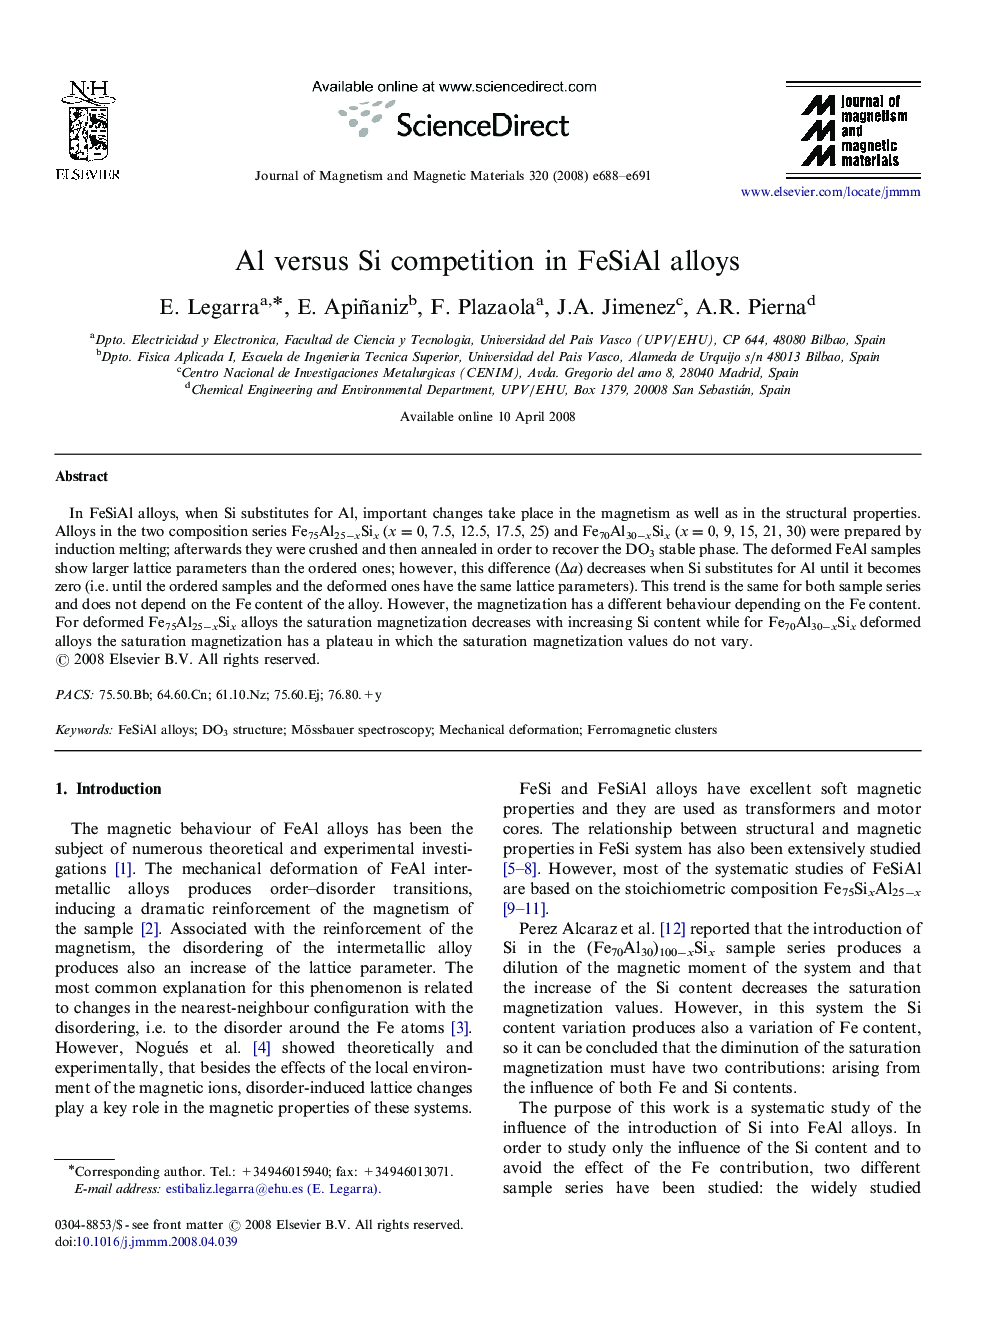 Al versus Si competition in FeSiAl alloys